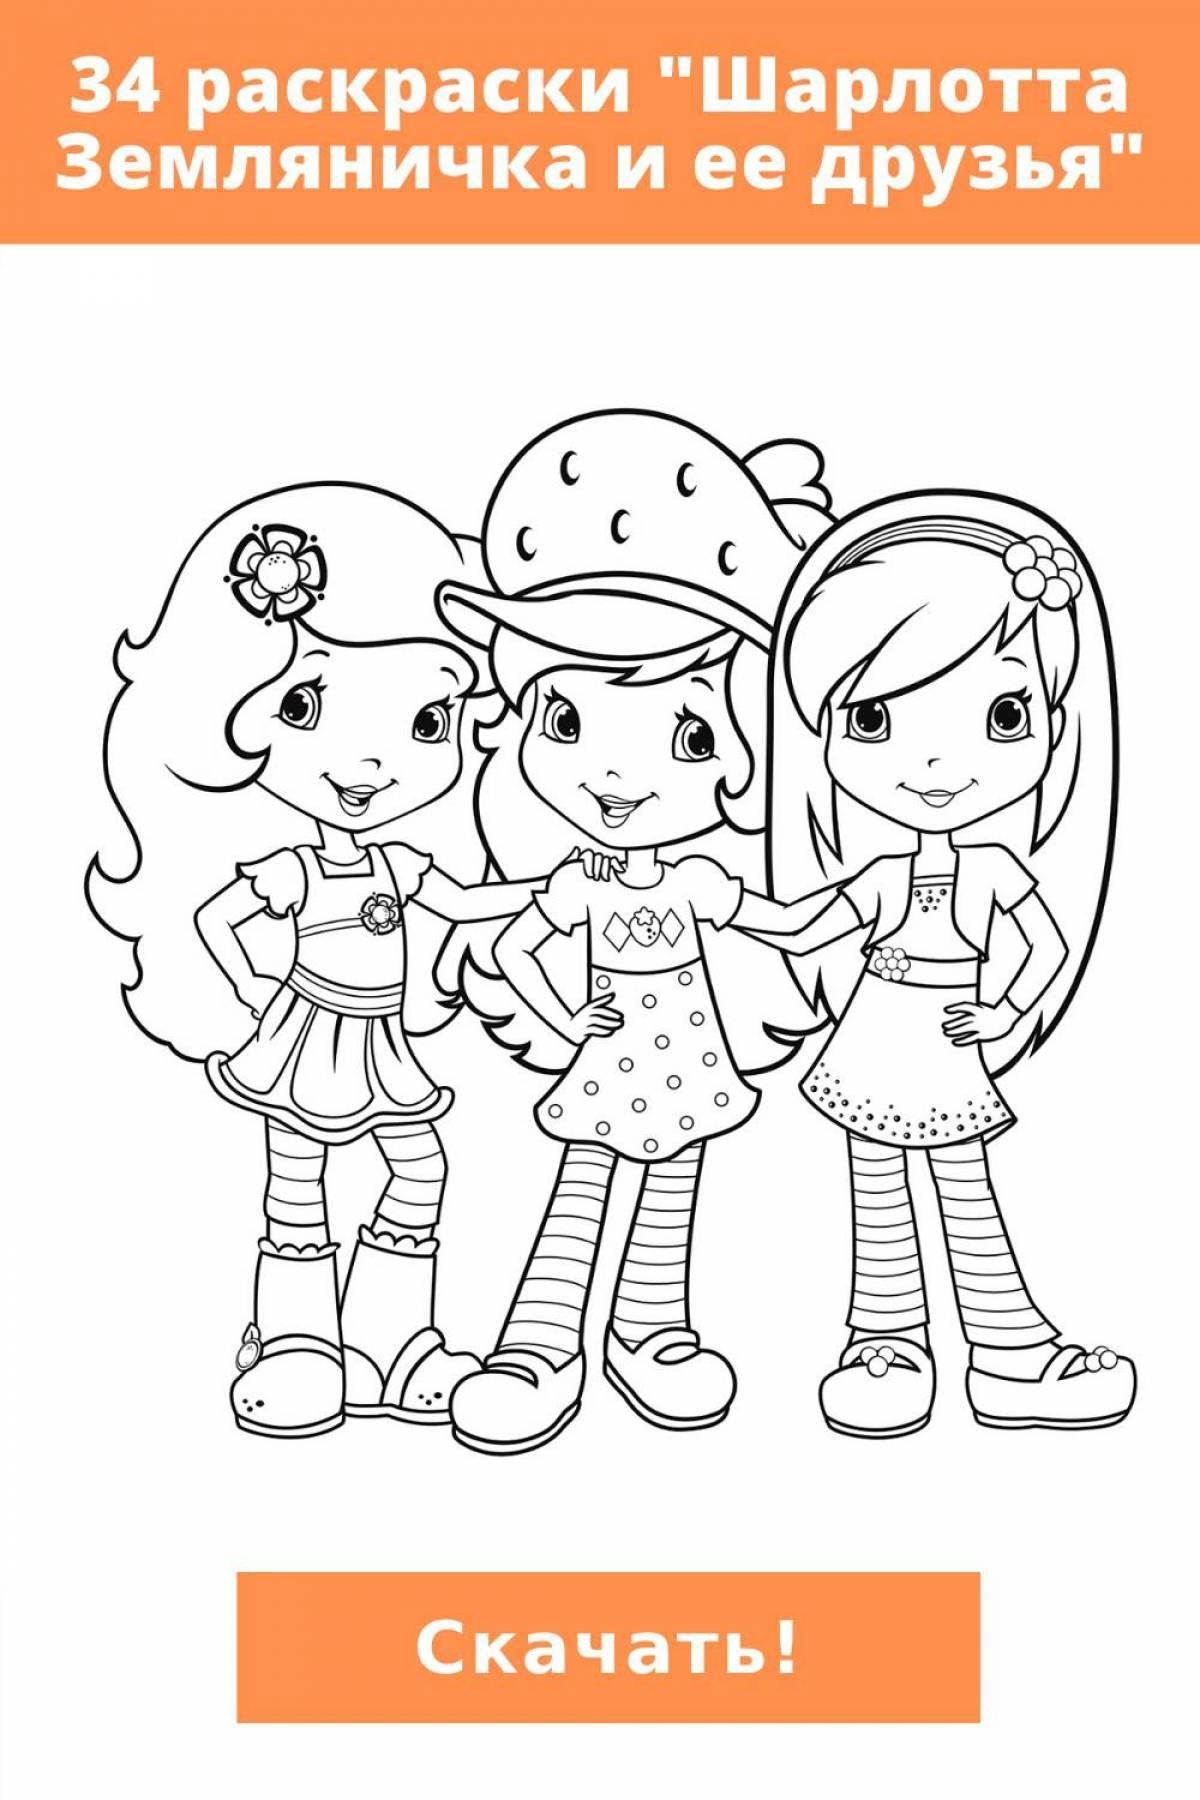 Gorgeous girly coloring book